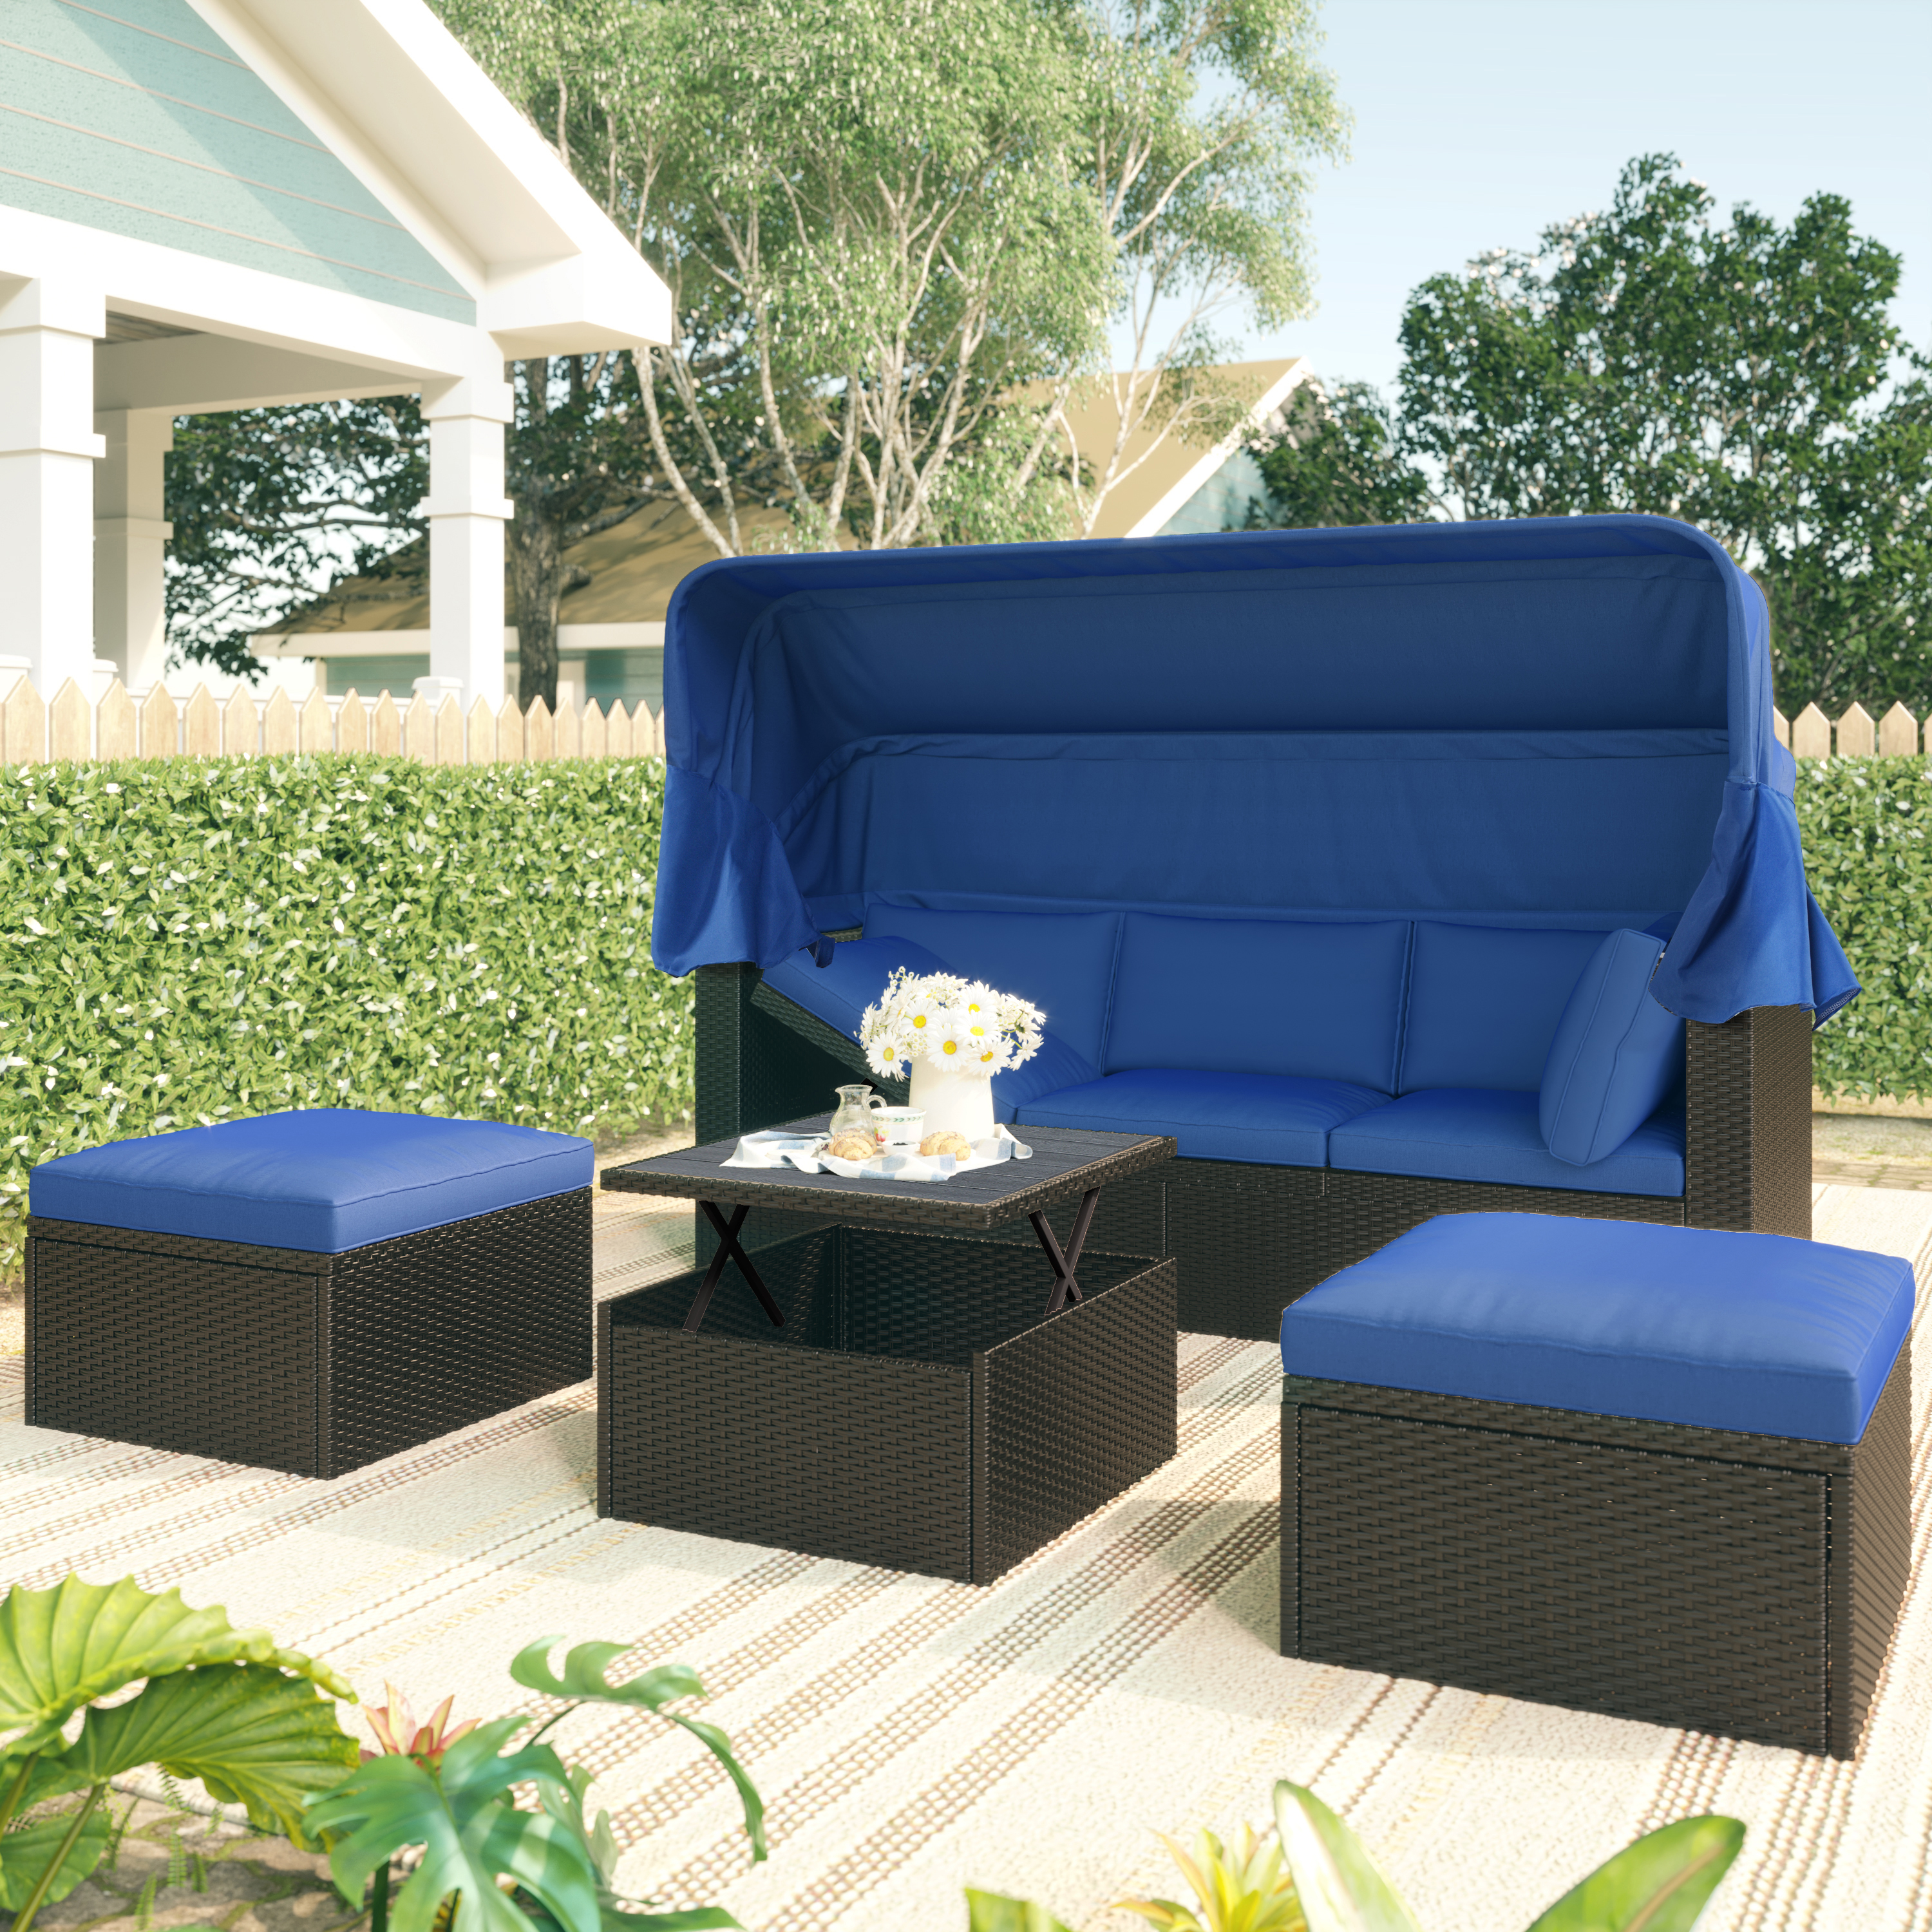 Outdoor Patio Rectangle Daybed with Retractable Canopy,  Wicker Furniture Sectional Seating with Washable Cushions, Backyard, Porch-Boyel Living